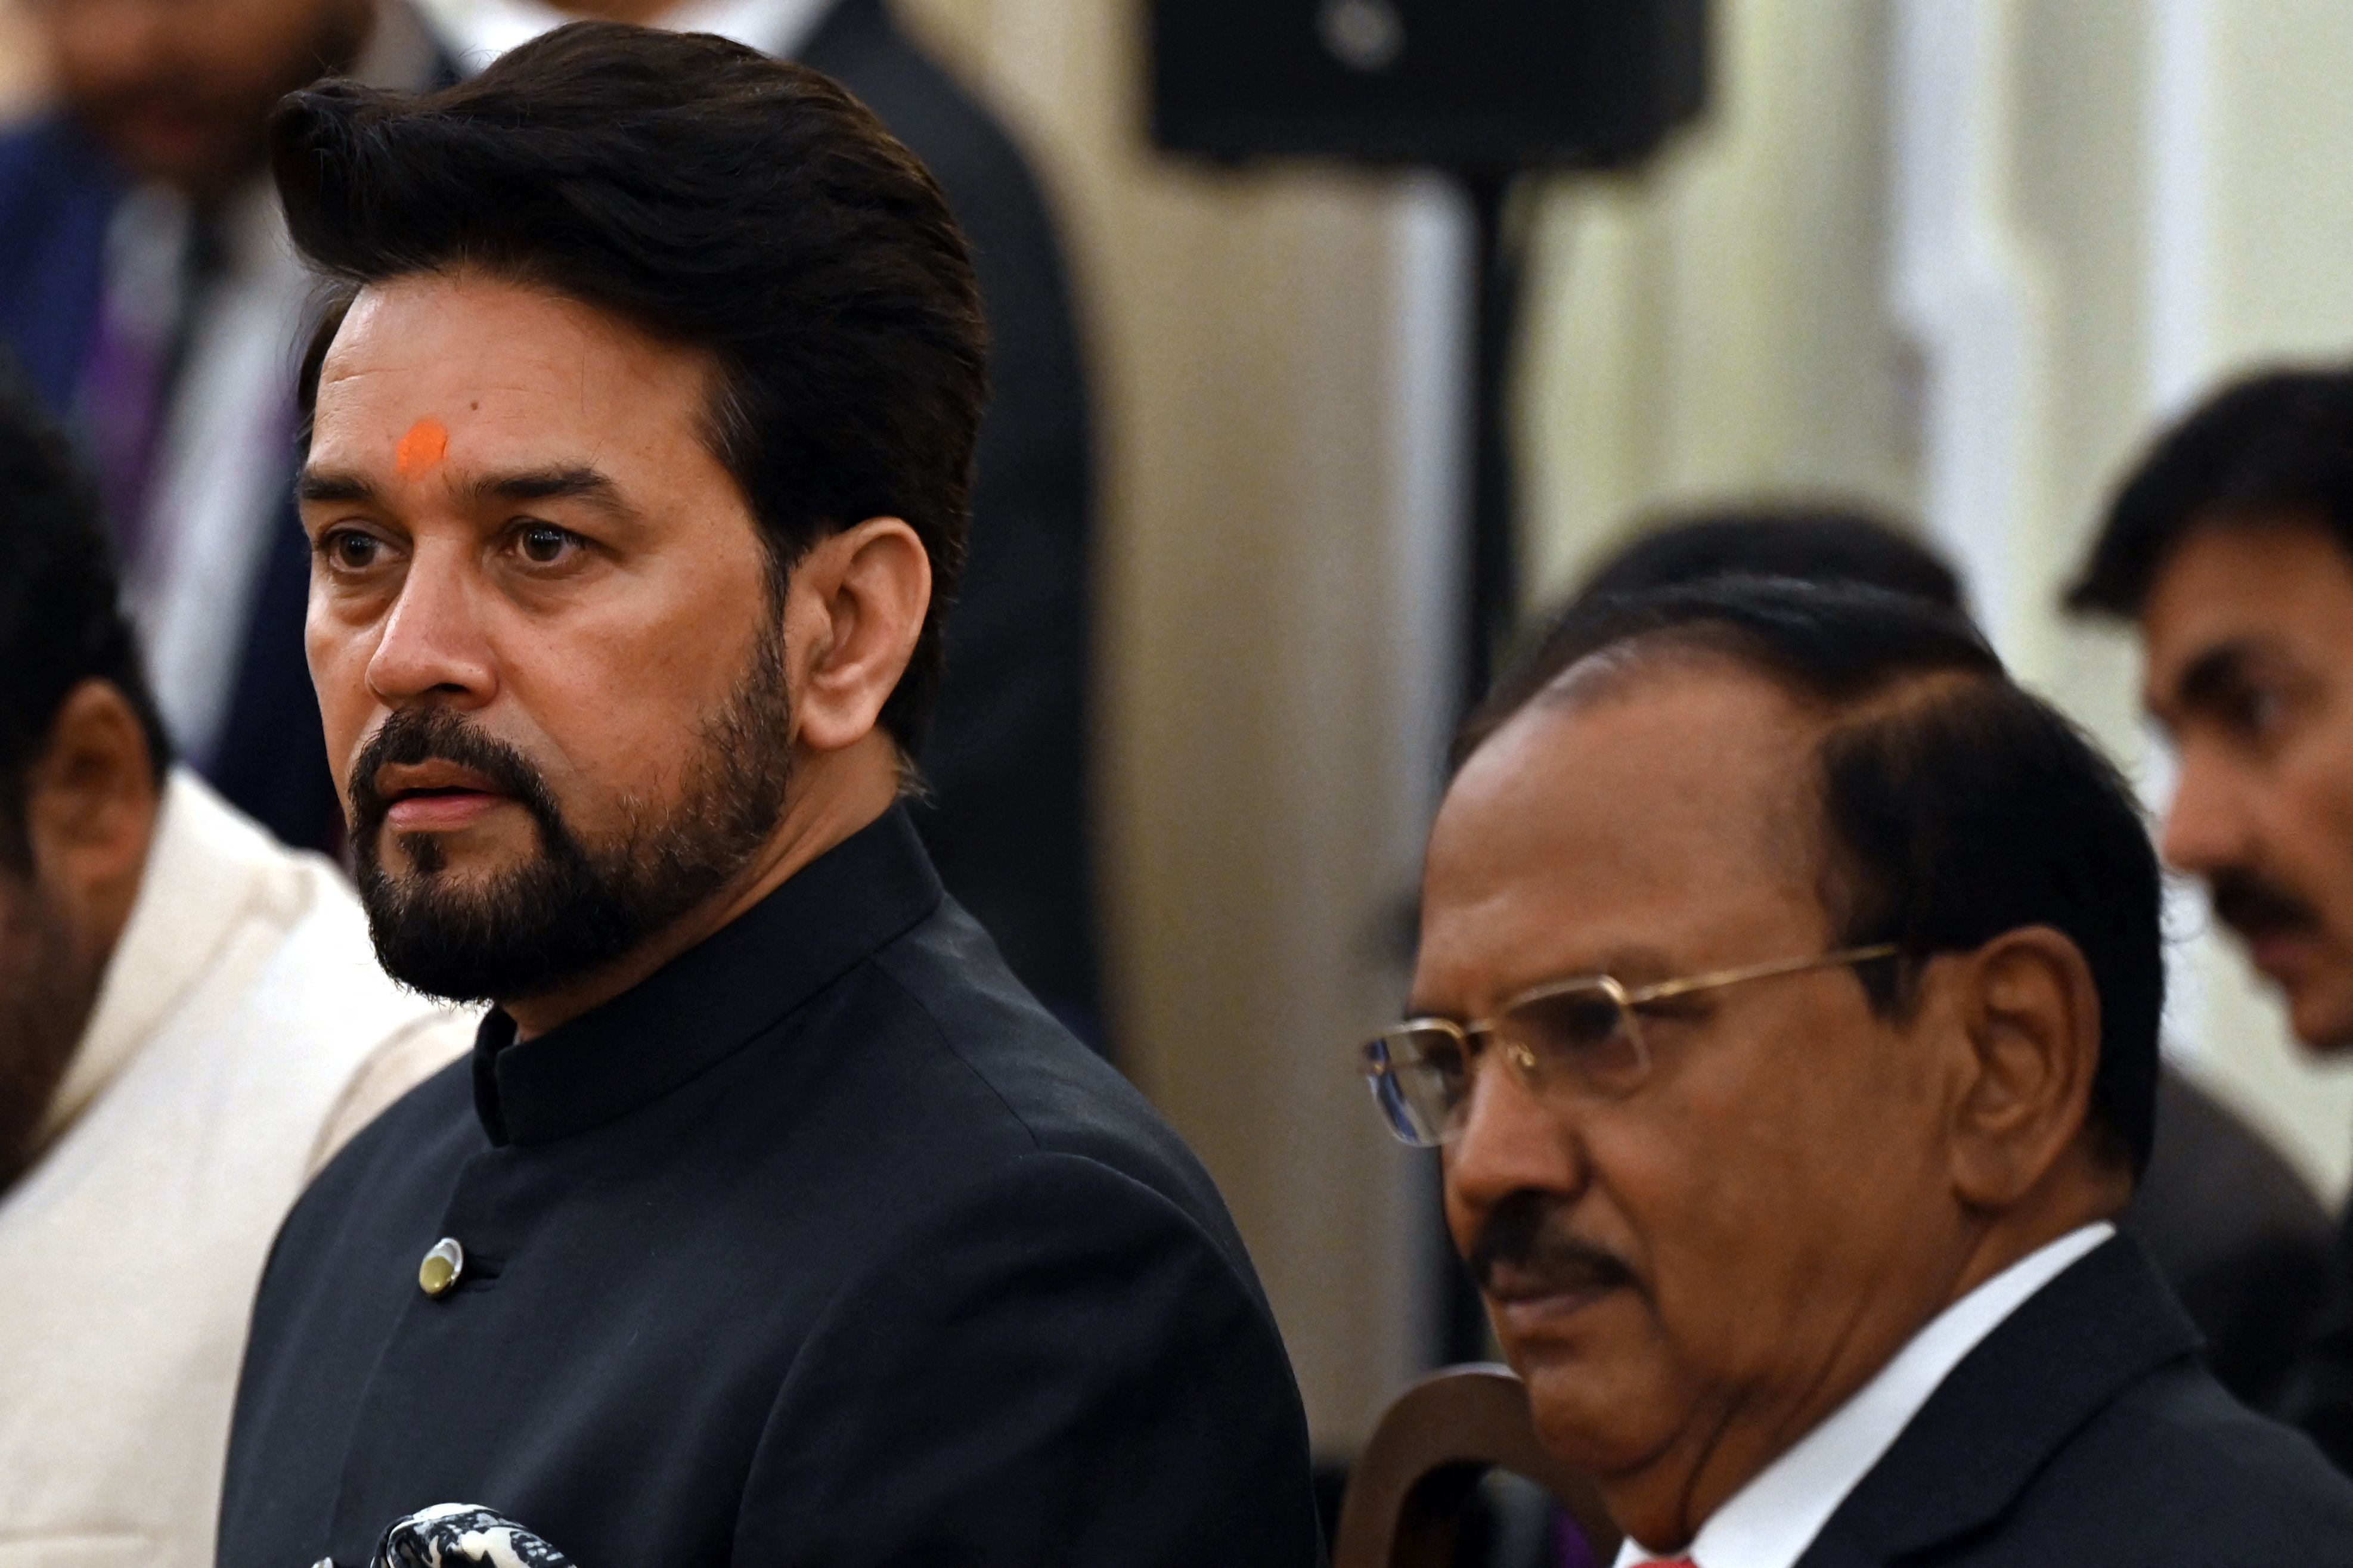 India’s minister of information and broadcasting Anurag Thakur (L) and national security advisor Ajit Doval at the Hyderabad House in New Delhi